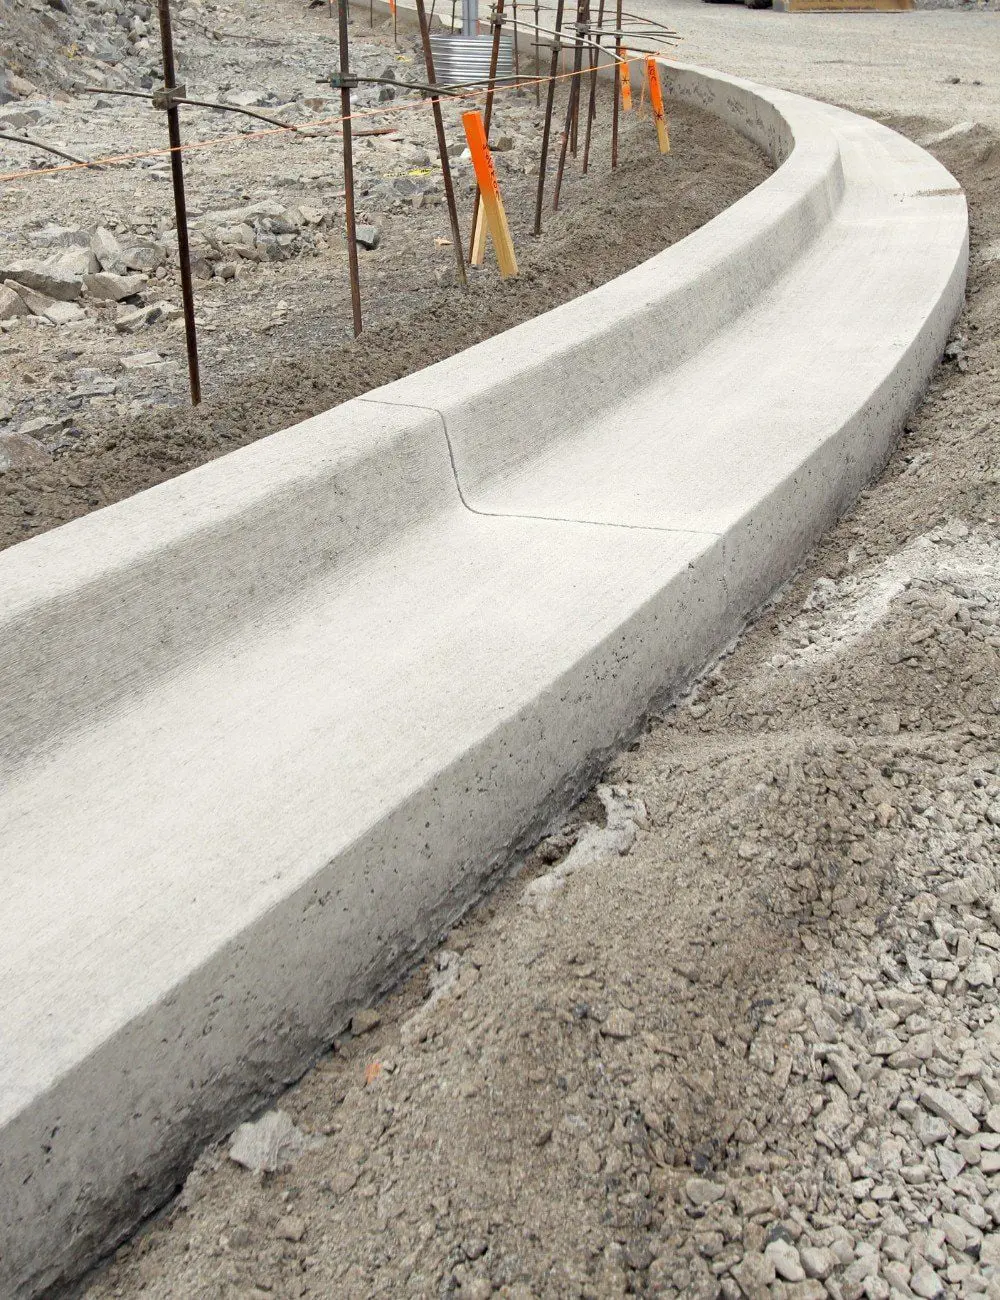 At a construction site, Reno Concrete Solutions has constructed a slightly curved concrete curb, surrounded by gravel, dirt, and rebar. Orange markers are visible on metal rods in the background. For details or a free quote on your next project, including Sun Valley decorative concrete options, contact us today.